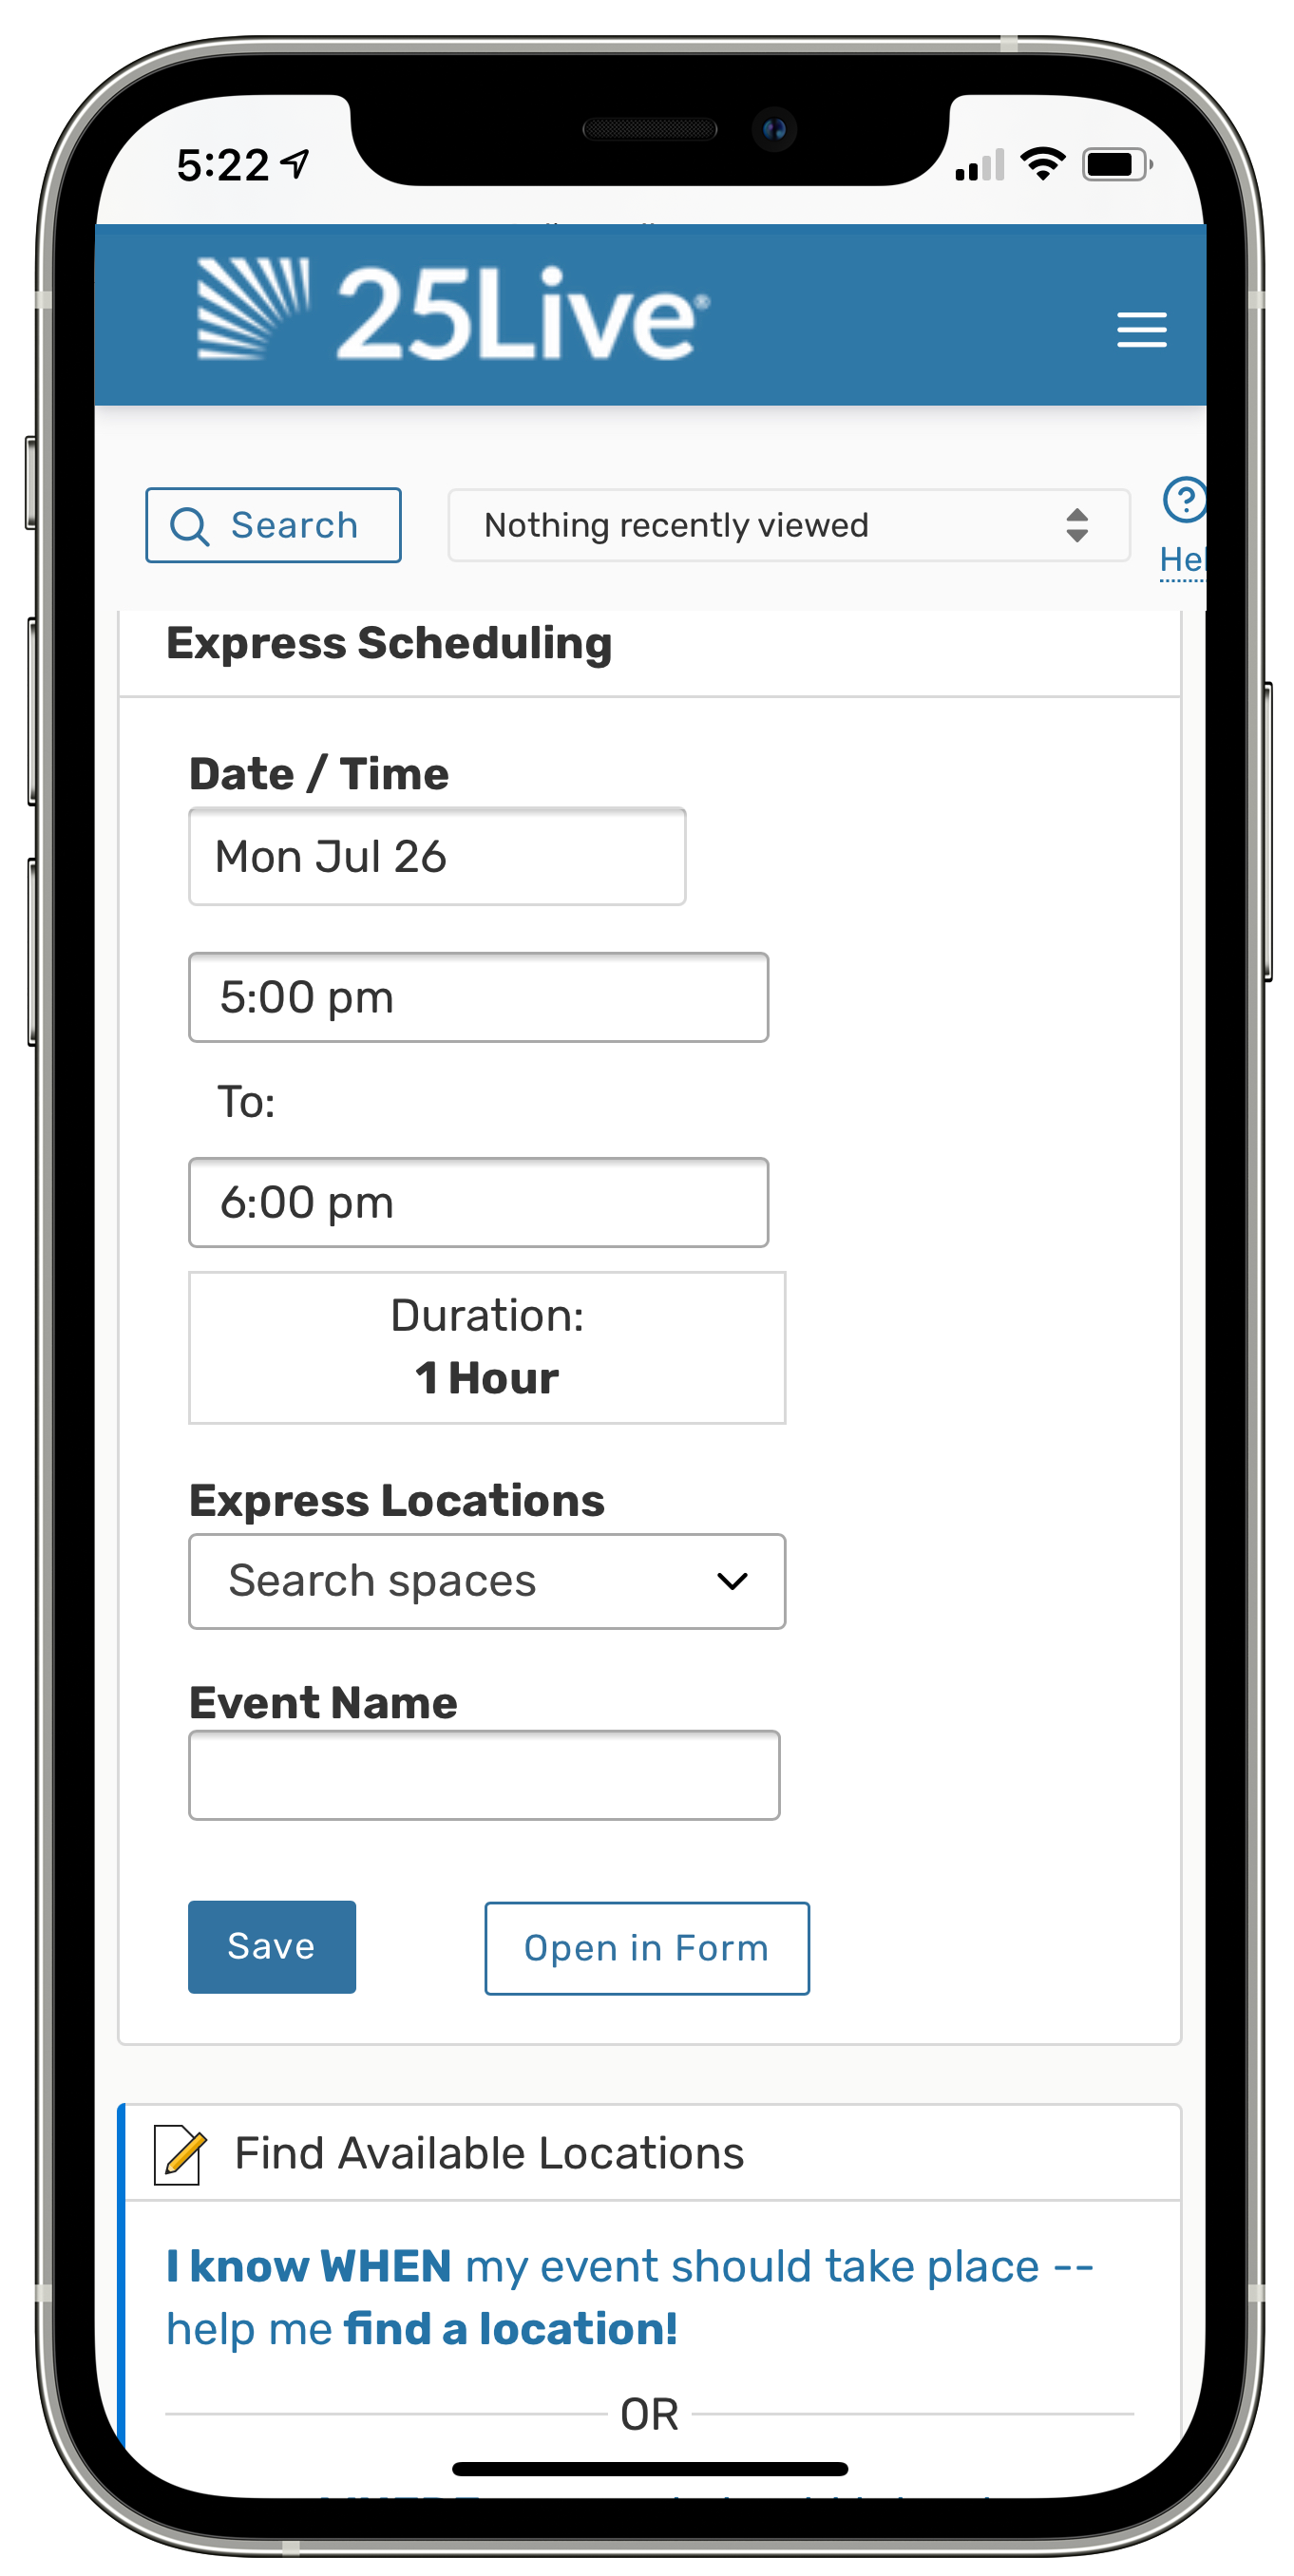 Express Scheduling on mobile